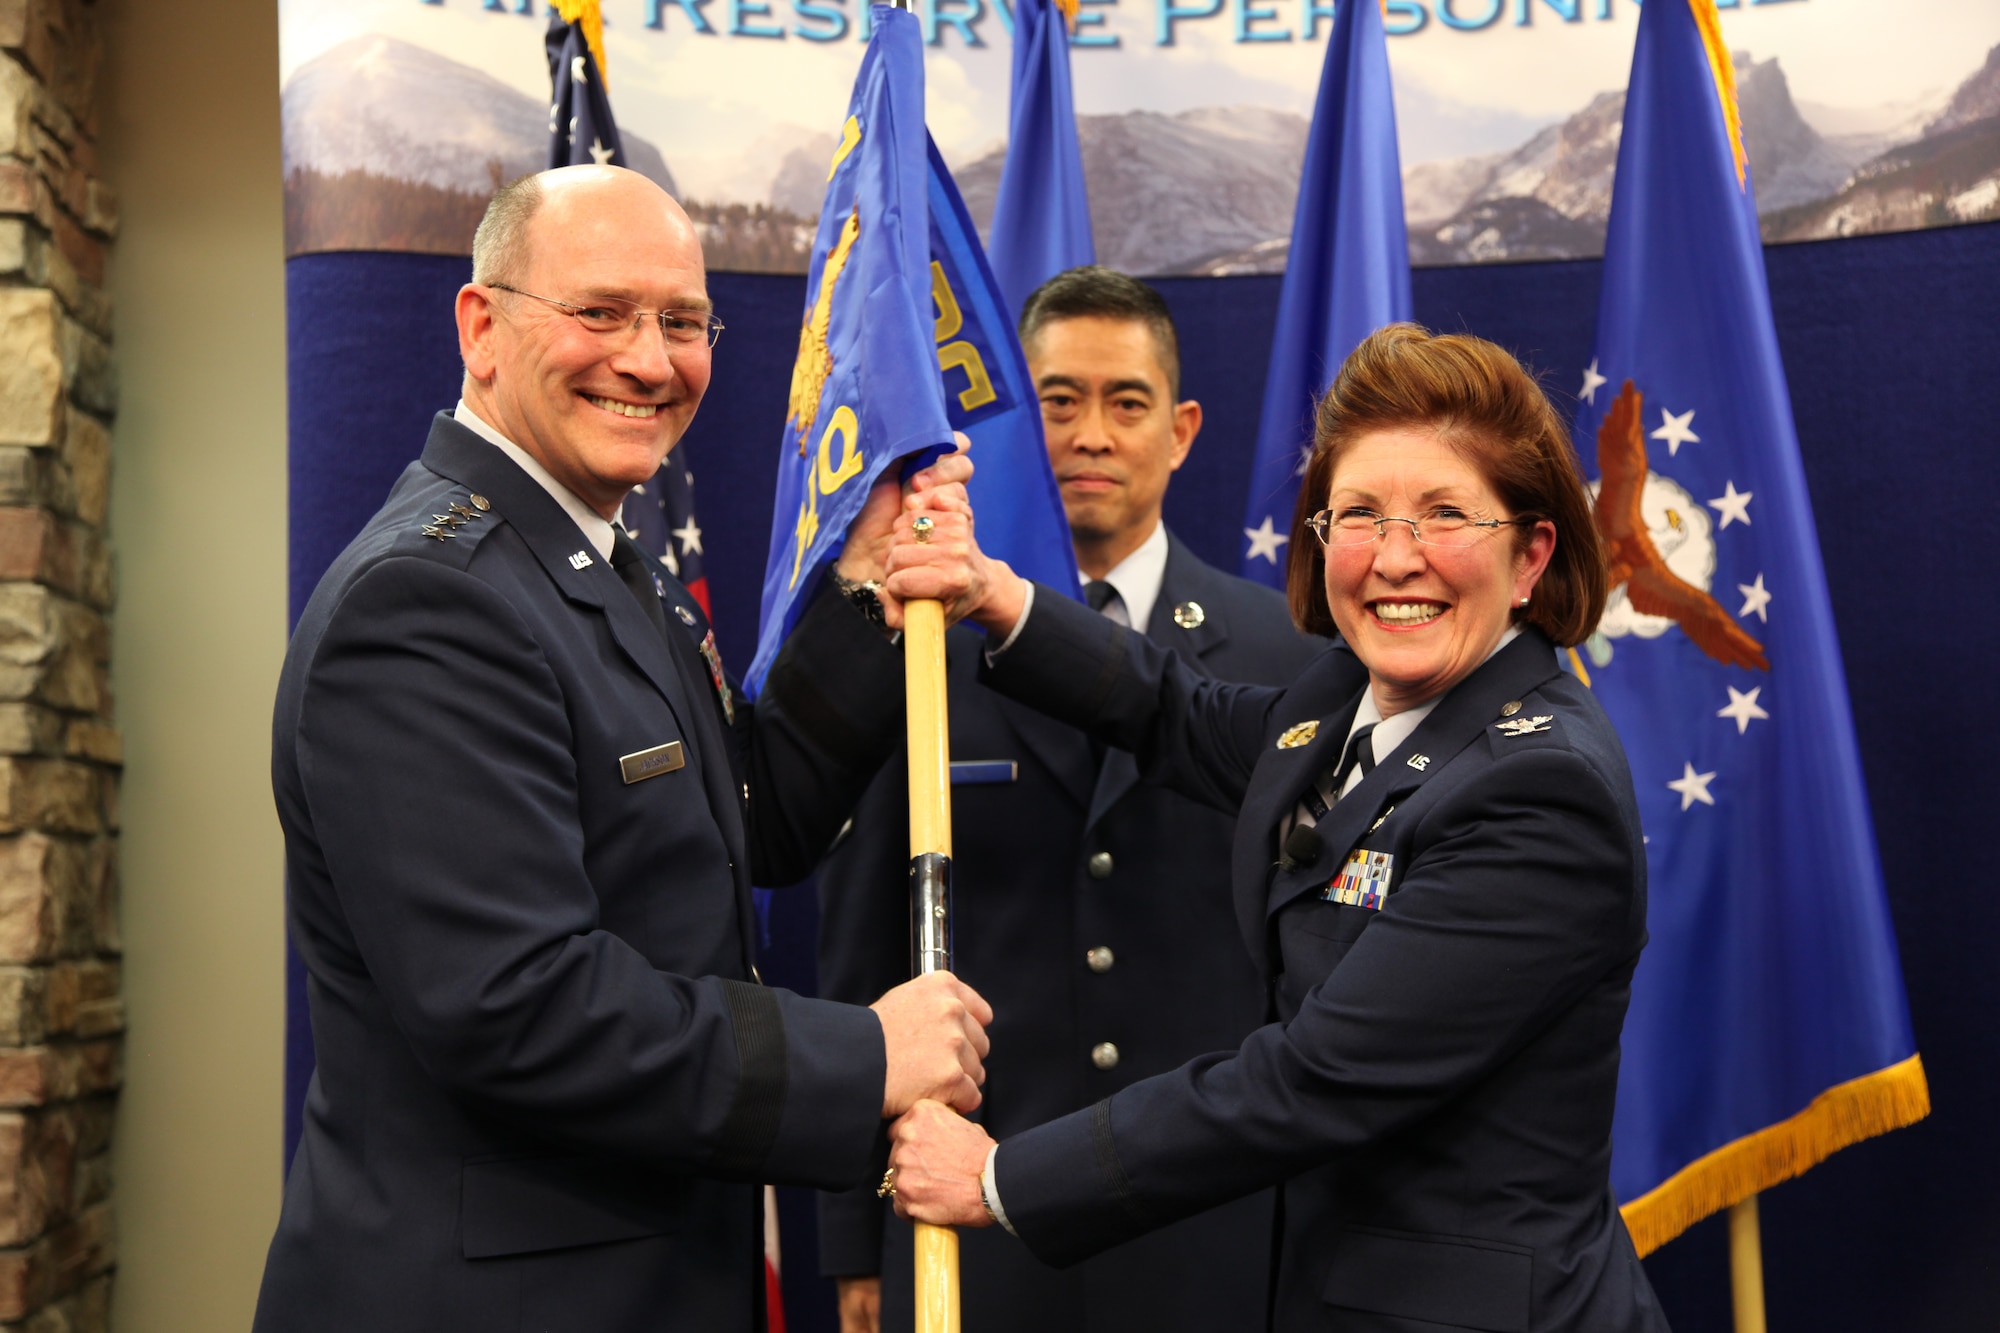 Lt. Gen. James “JJ” Jackson, chief of the Air Force Reserve and commander of the Air Force Reserve Command, takes the Air Reserve Personnel Center guidon from Col. Patricia S. Blassie, outgoing ARPC commander, as Chief Master Sgt. Brian Wong, ARPC command chief, looks on during a change of command ceremony held Jan. 25, 2013, on Buckley Air Force Base, Colo. Blassie will serve at the Air Force Reserve Command as the chief of the Professional Development Center. Incoming ARPC commander, Brig. Gen. John C. Flournoy, Jr, who was the 349th Air Mobility Wing Commander at Travis AFB, Calif., assumed command of the center. (U.S. Air Force photo/Tech. Sgt. Rob Hazelett)